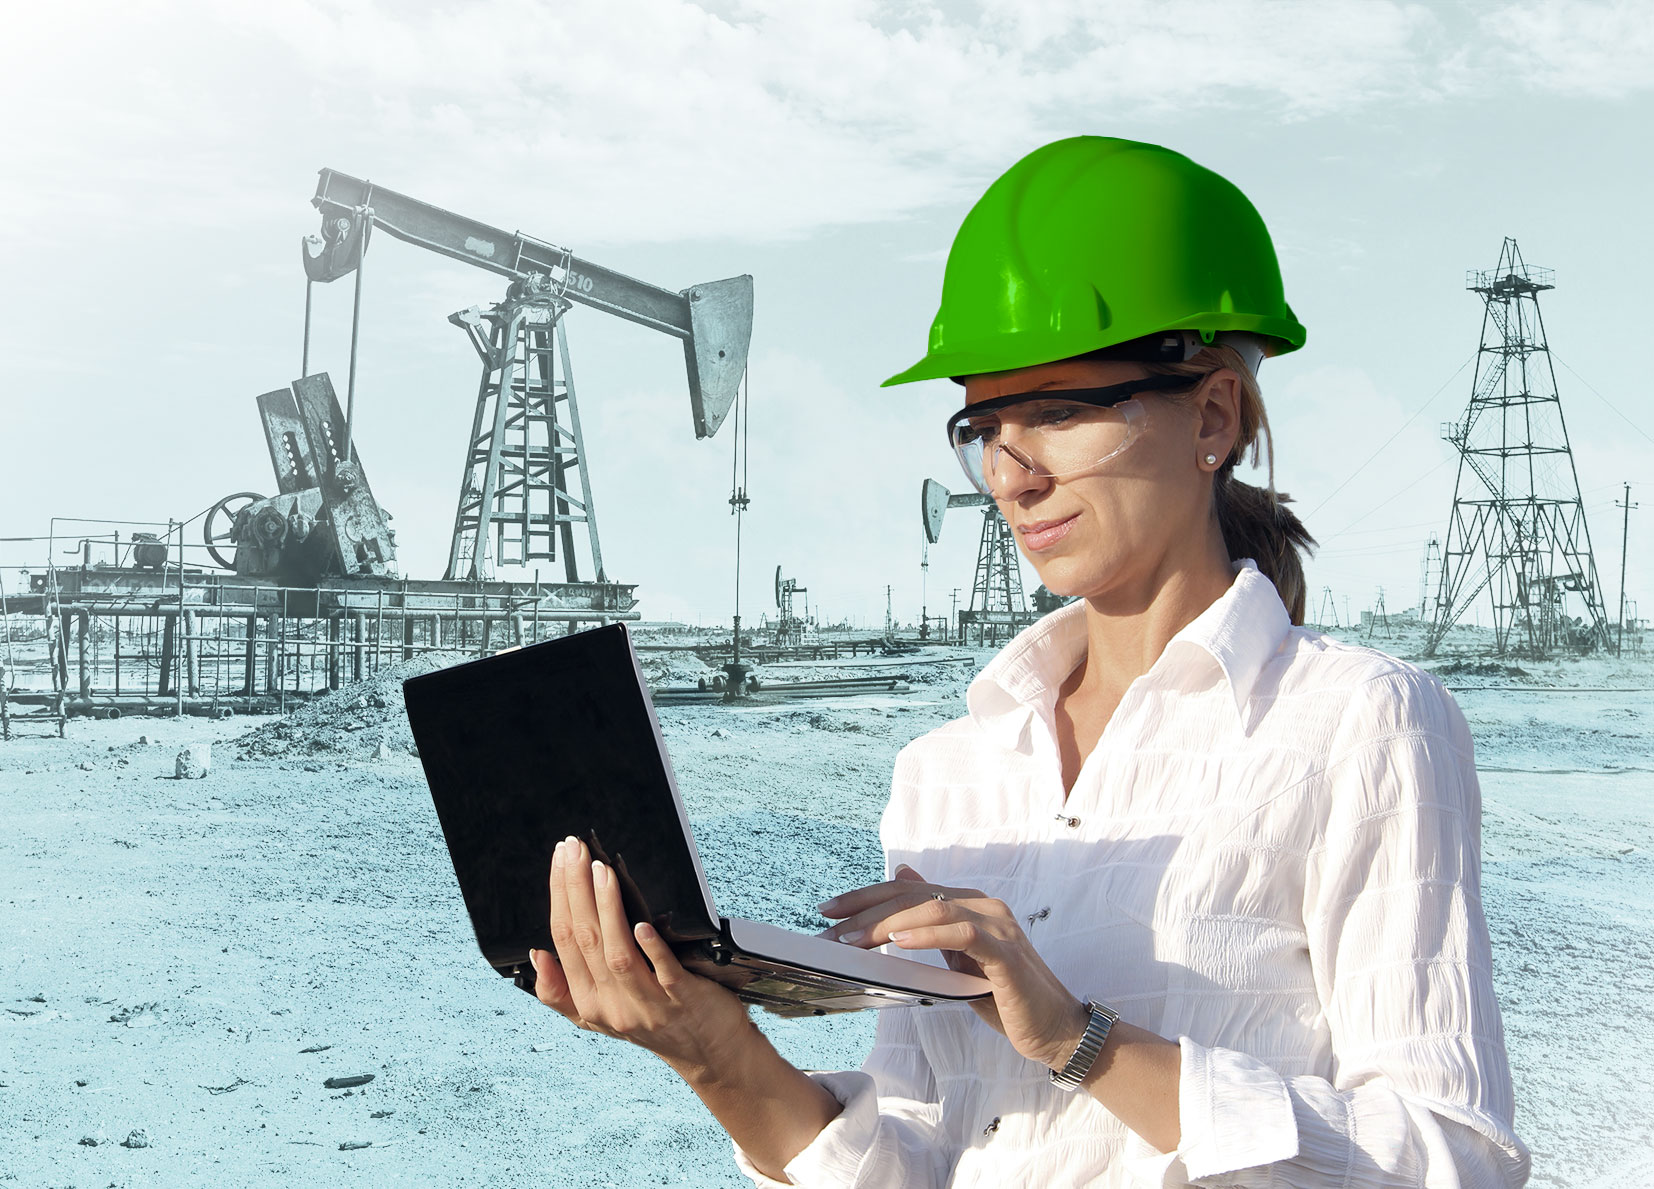 Enverus Blog - Oil and gas procurement automation: End project delays and overspending